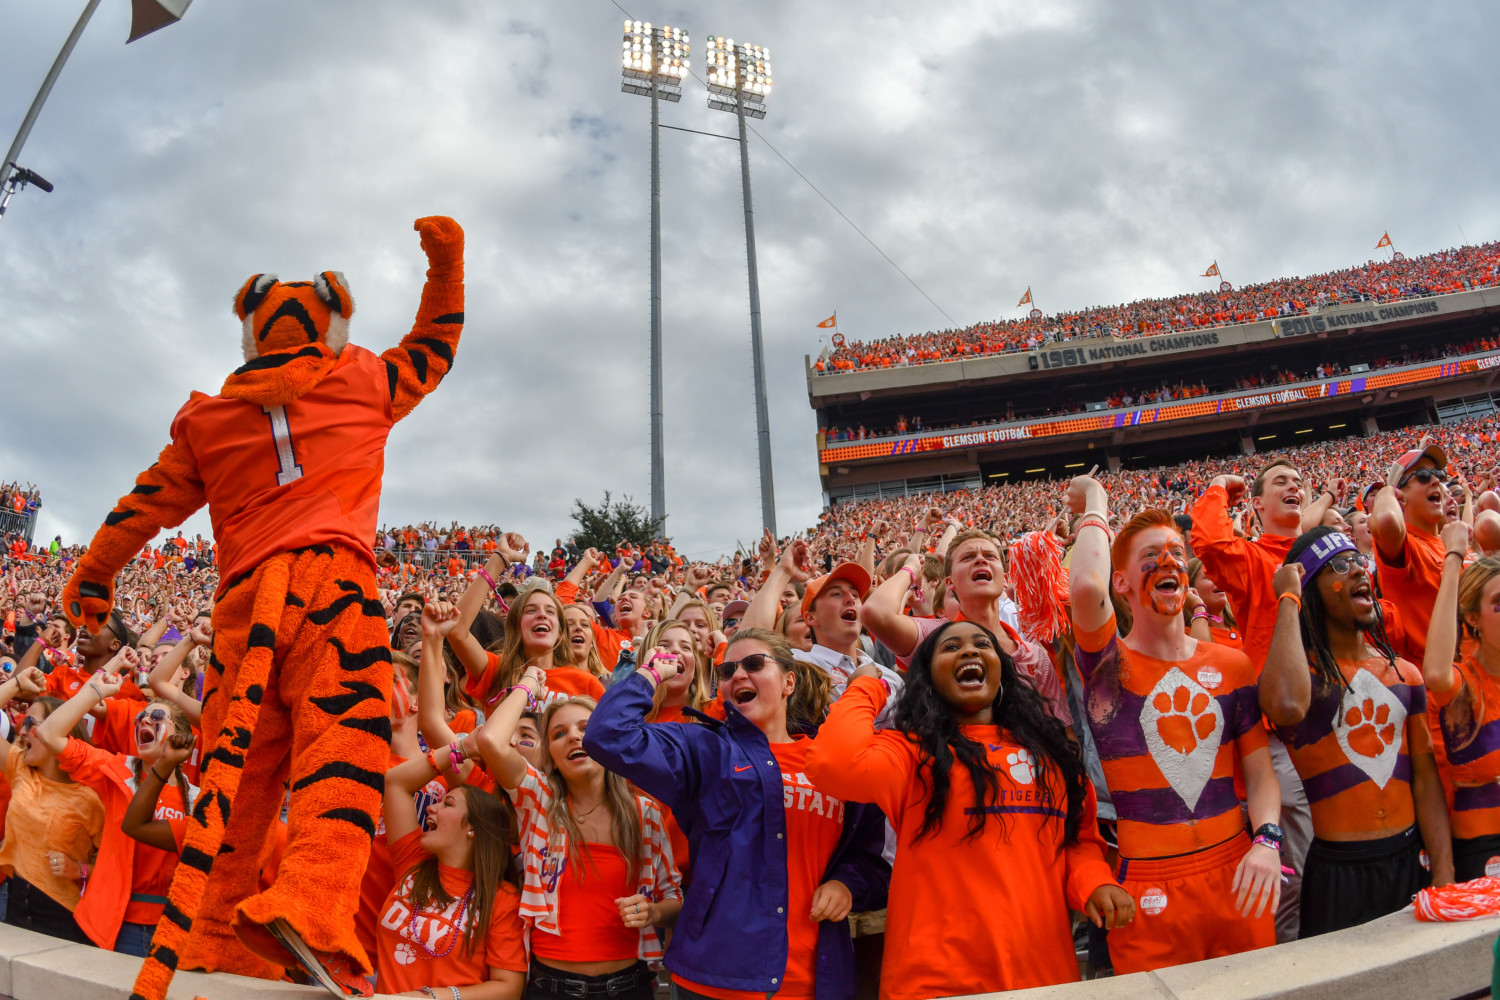 Members of the Clemson student body cheer on the Tigers at a football game against South Carolina on Nov. 24, 2018.